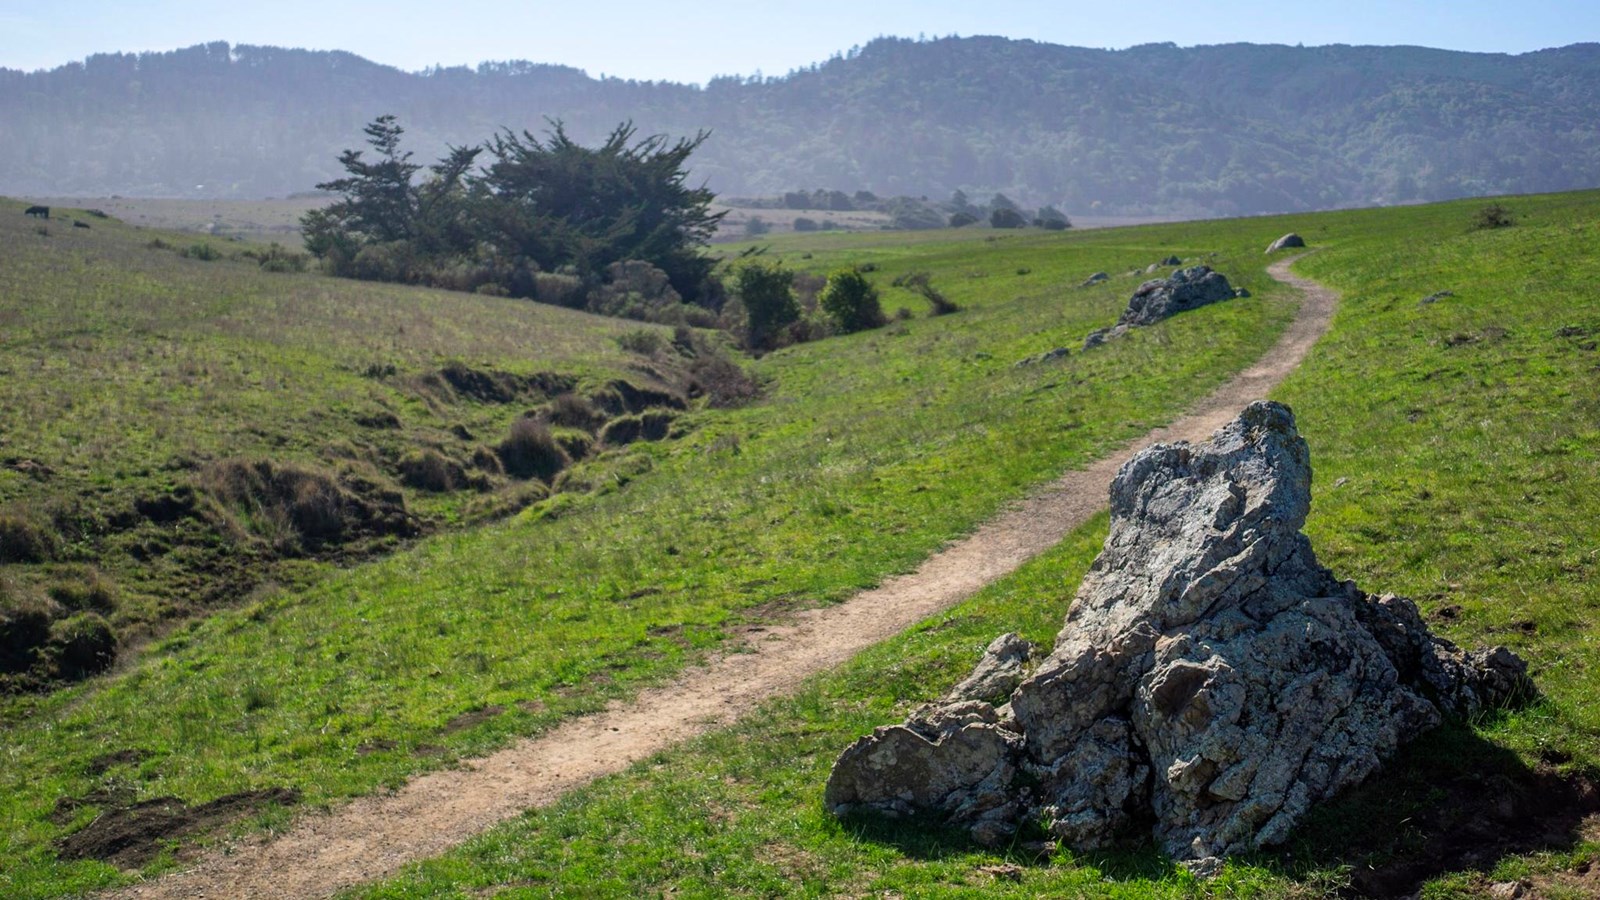 The trail leads through pasture land to Tomales Bay.